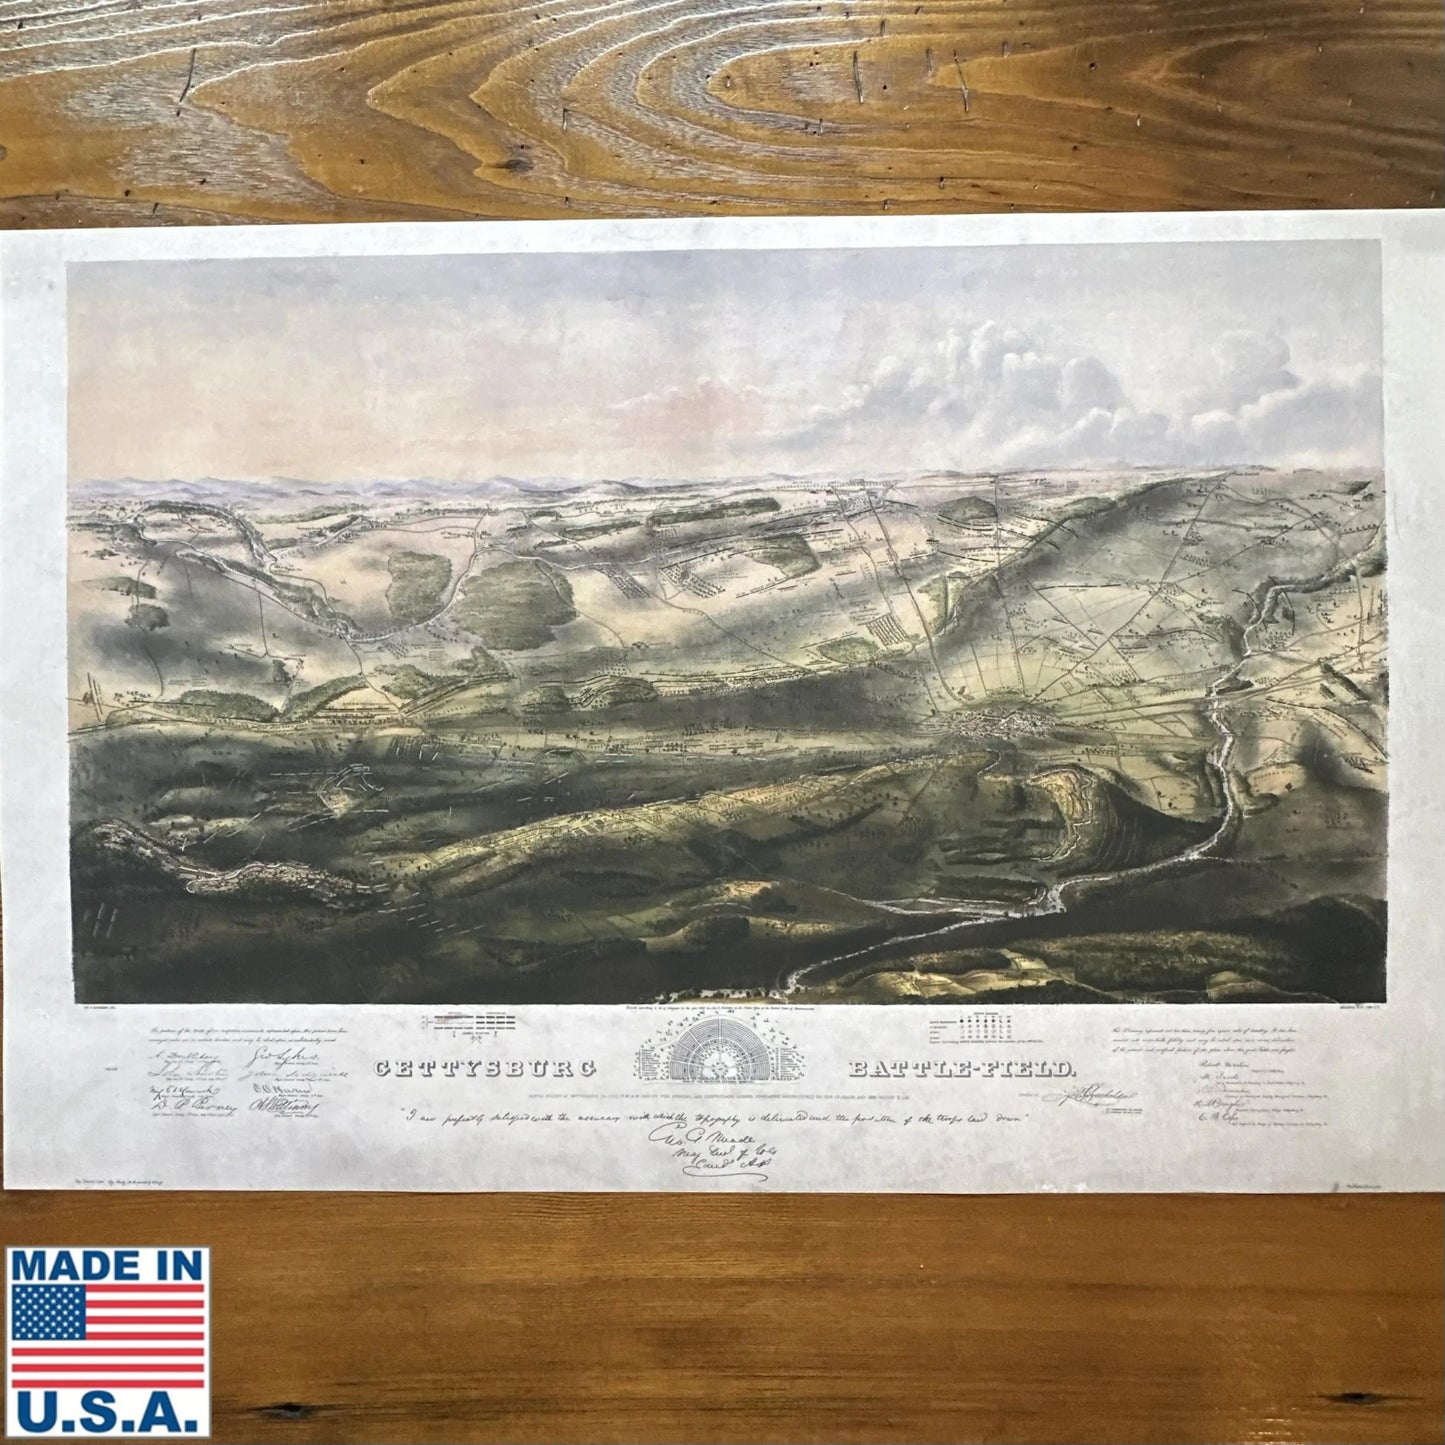 Famous Gettysburg print — In color — 24" x 36" Archival reproduction